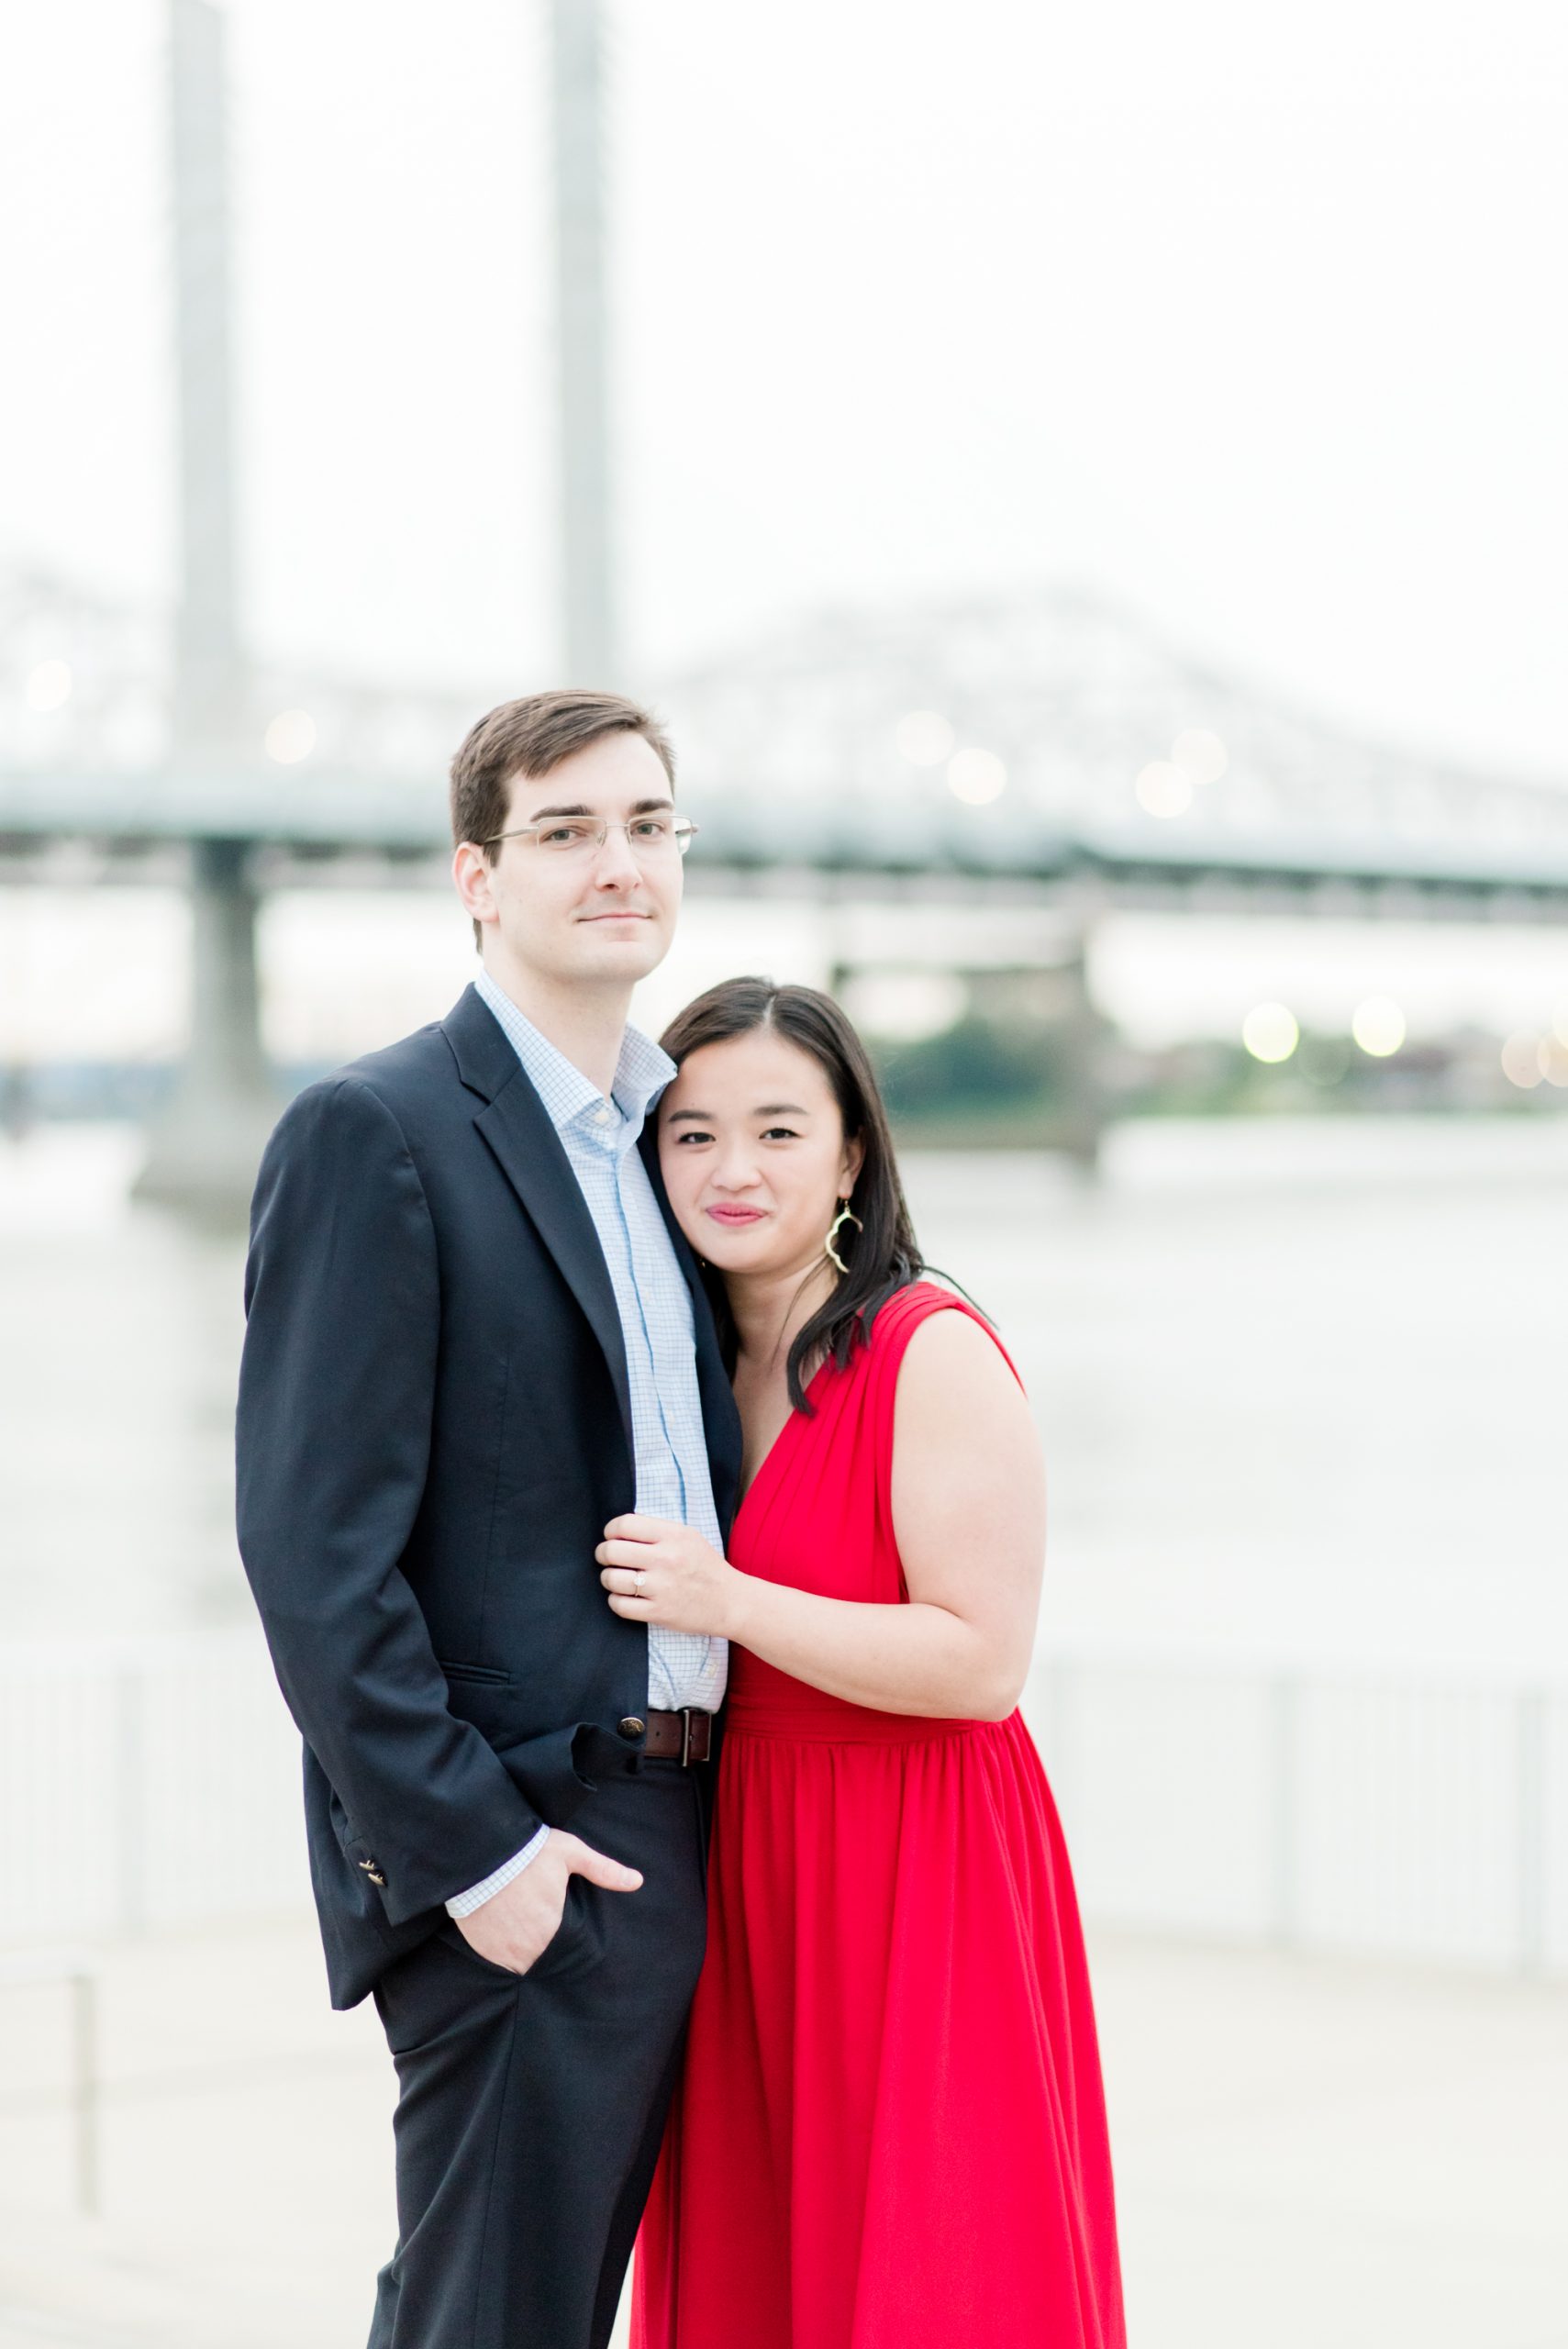 downtown-louisville-engagement-katie-gallagher-photography-louisville-ky-3508